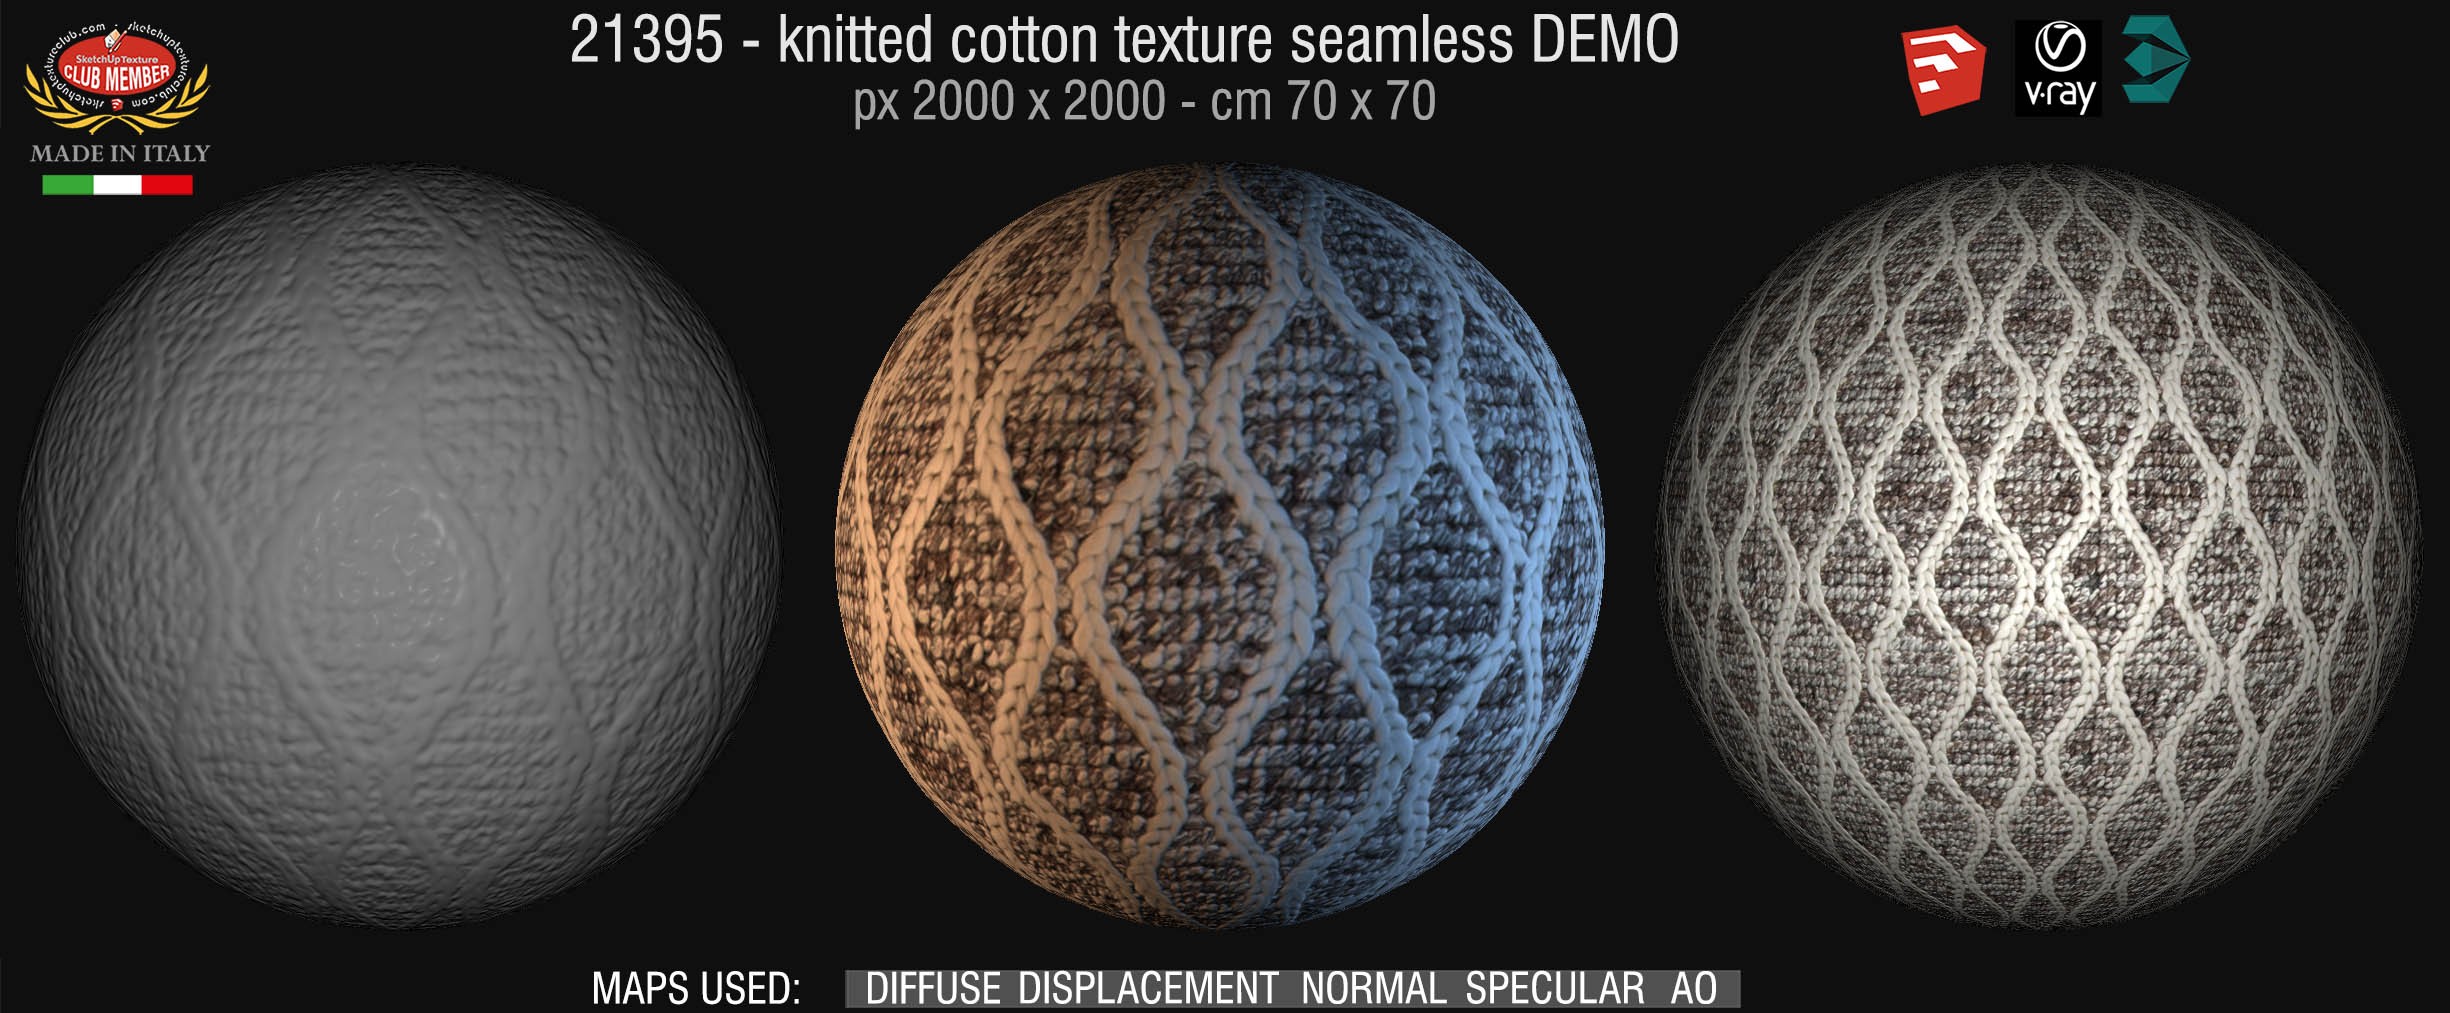 21395 knitted cotton textures seamless + maps DEMO